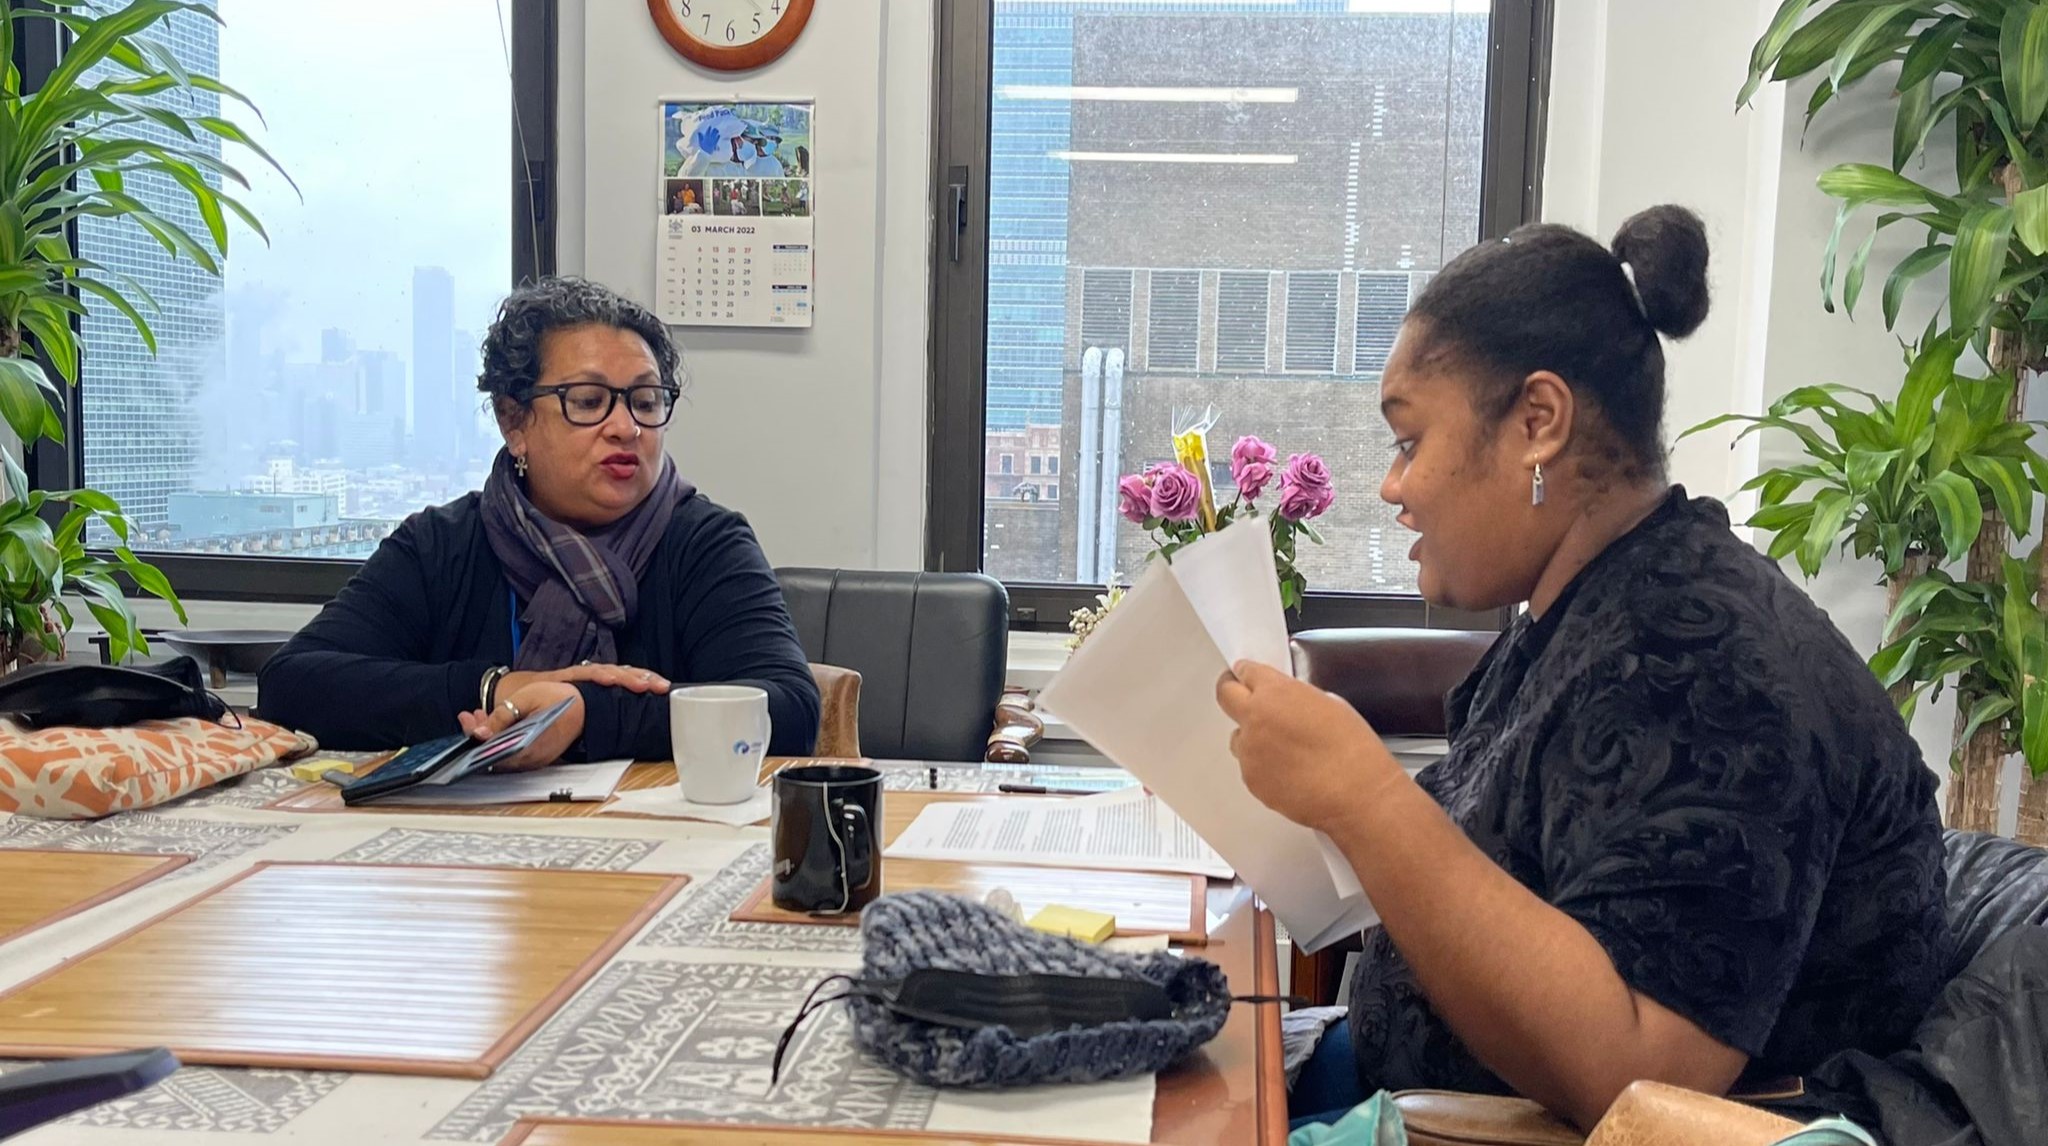 Ms Bhagwan Rolls and Ms Carolyn Kitione during a preparatory session during CSW66 at the Fiji mission, New York, USA, March 2022. Photo: StPC